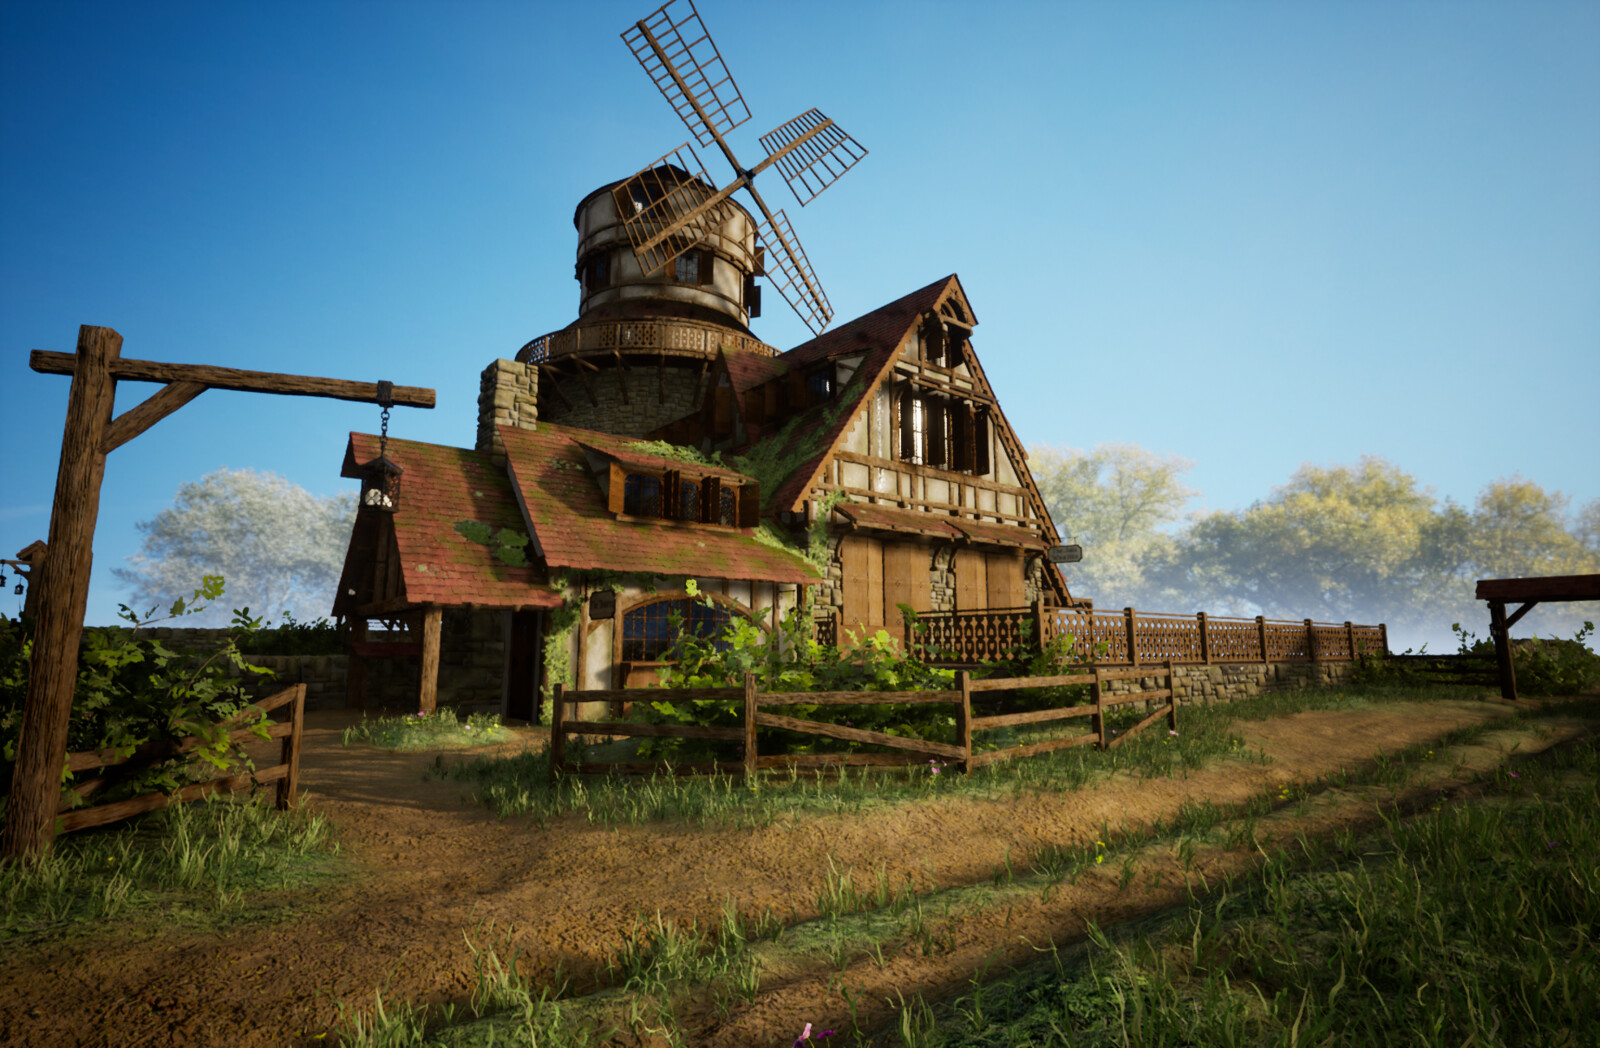 The Medieval Windmill - Module 5